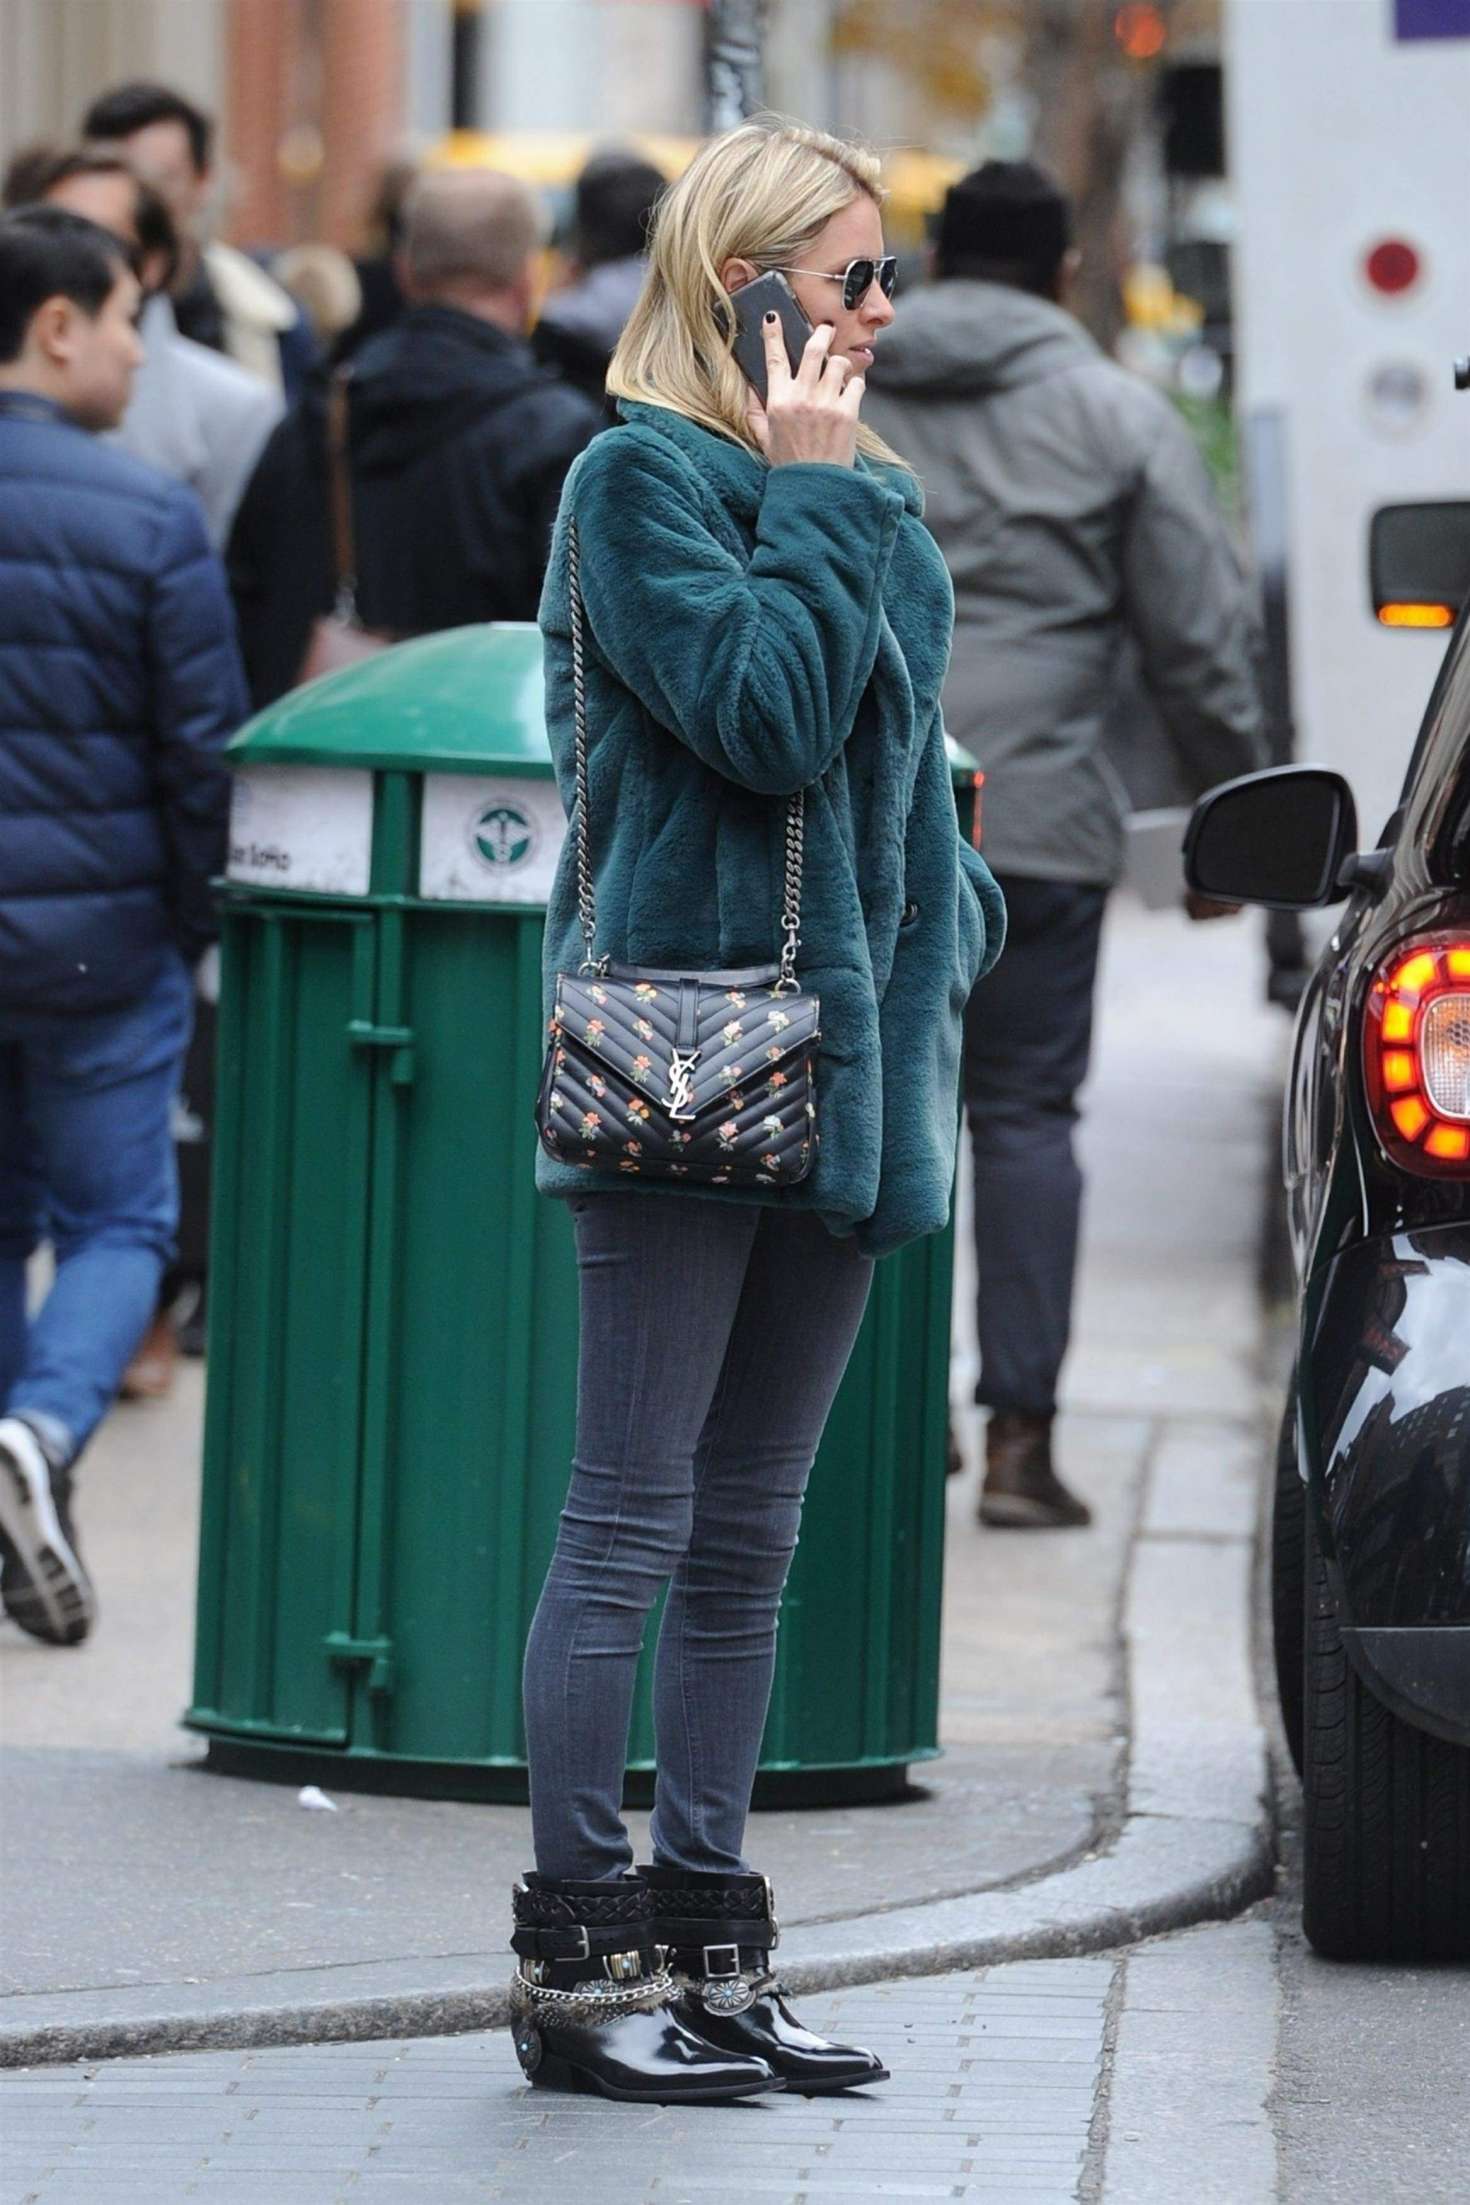 Nicky Hilton in Green Fur Coat â€“ Out in New York City